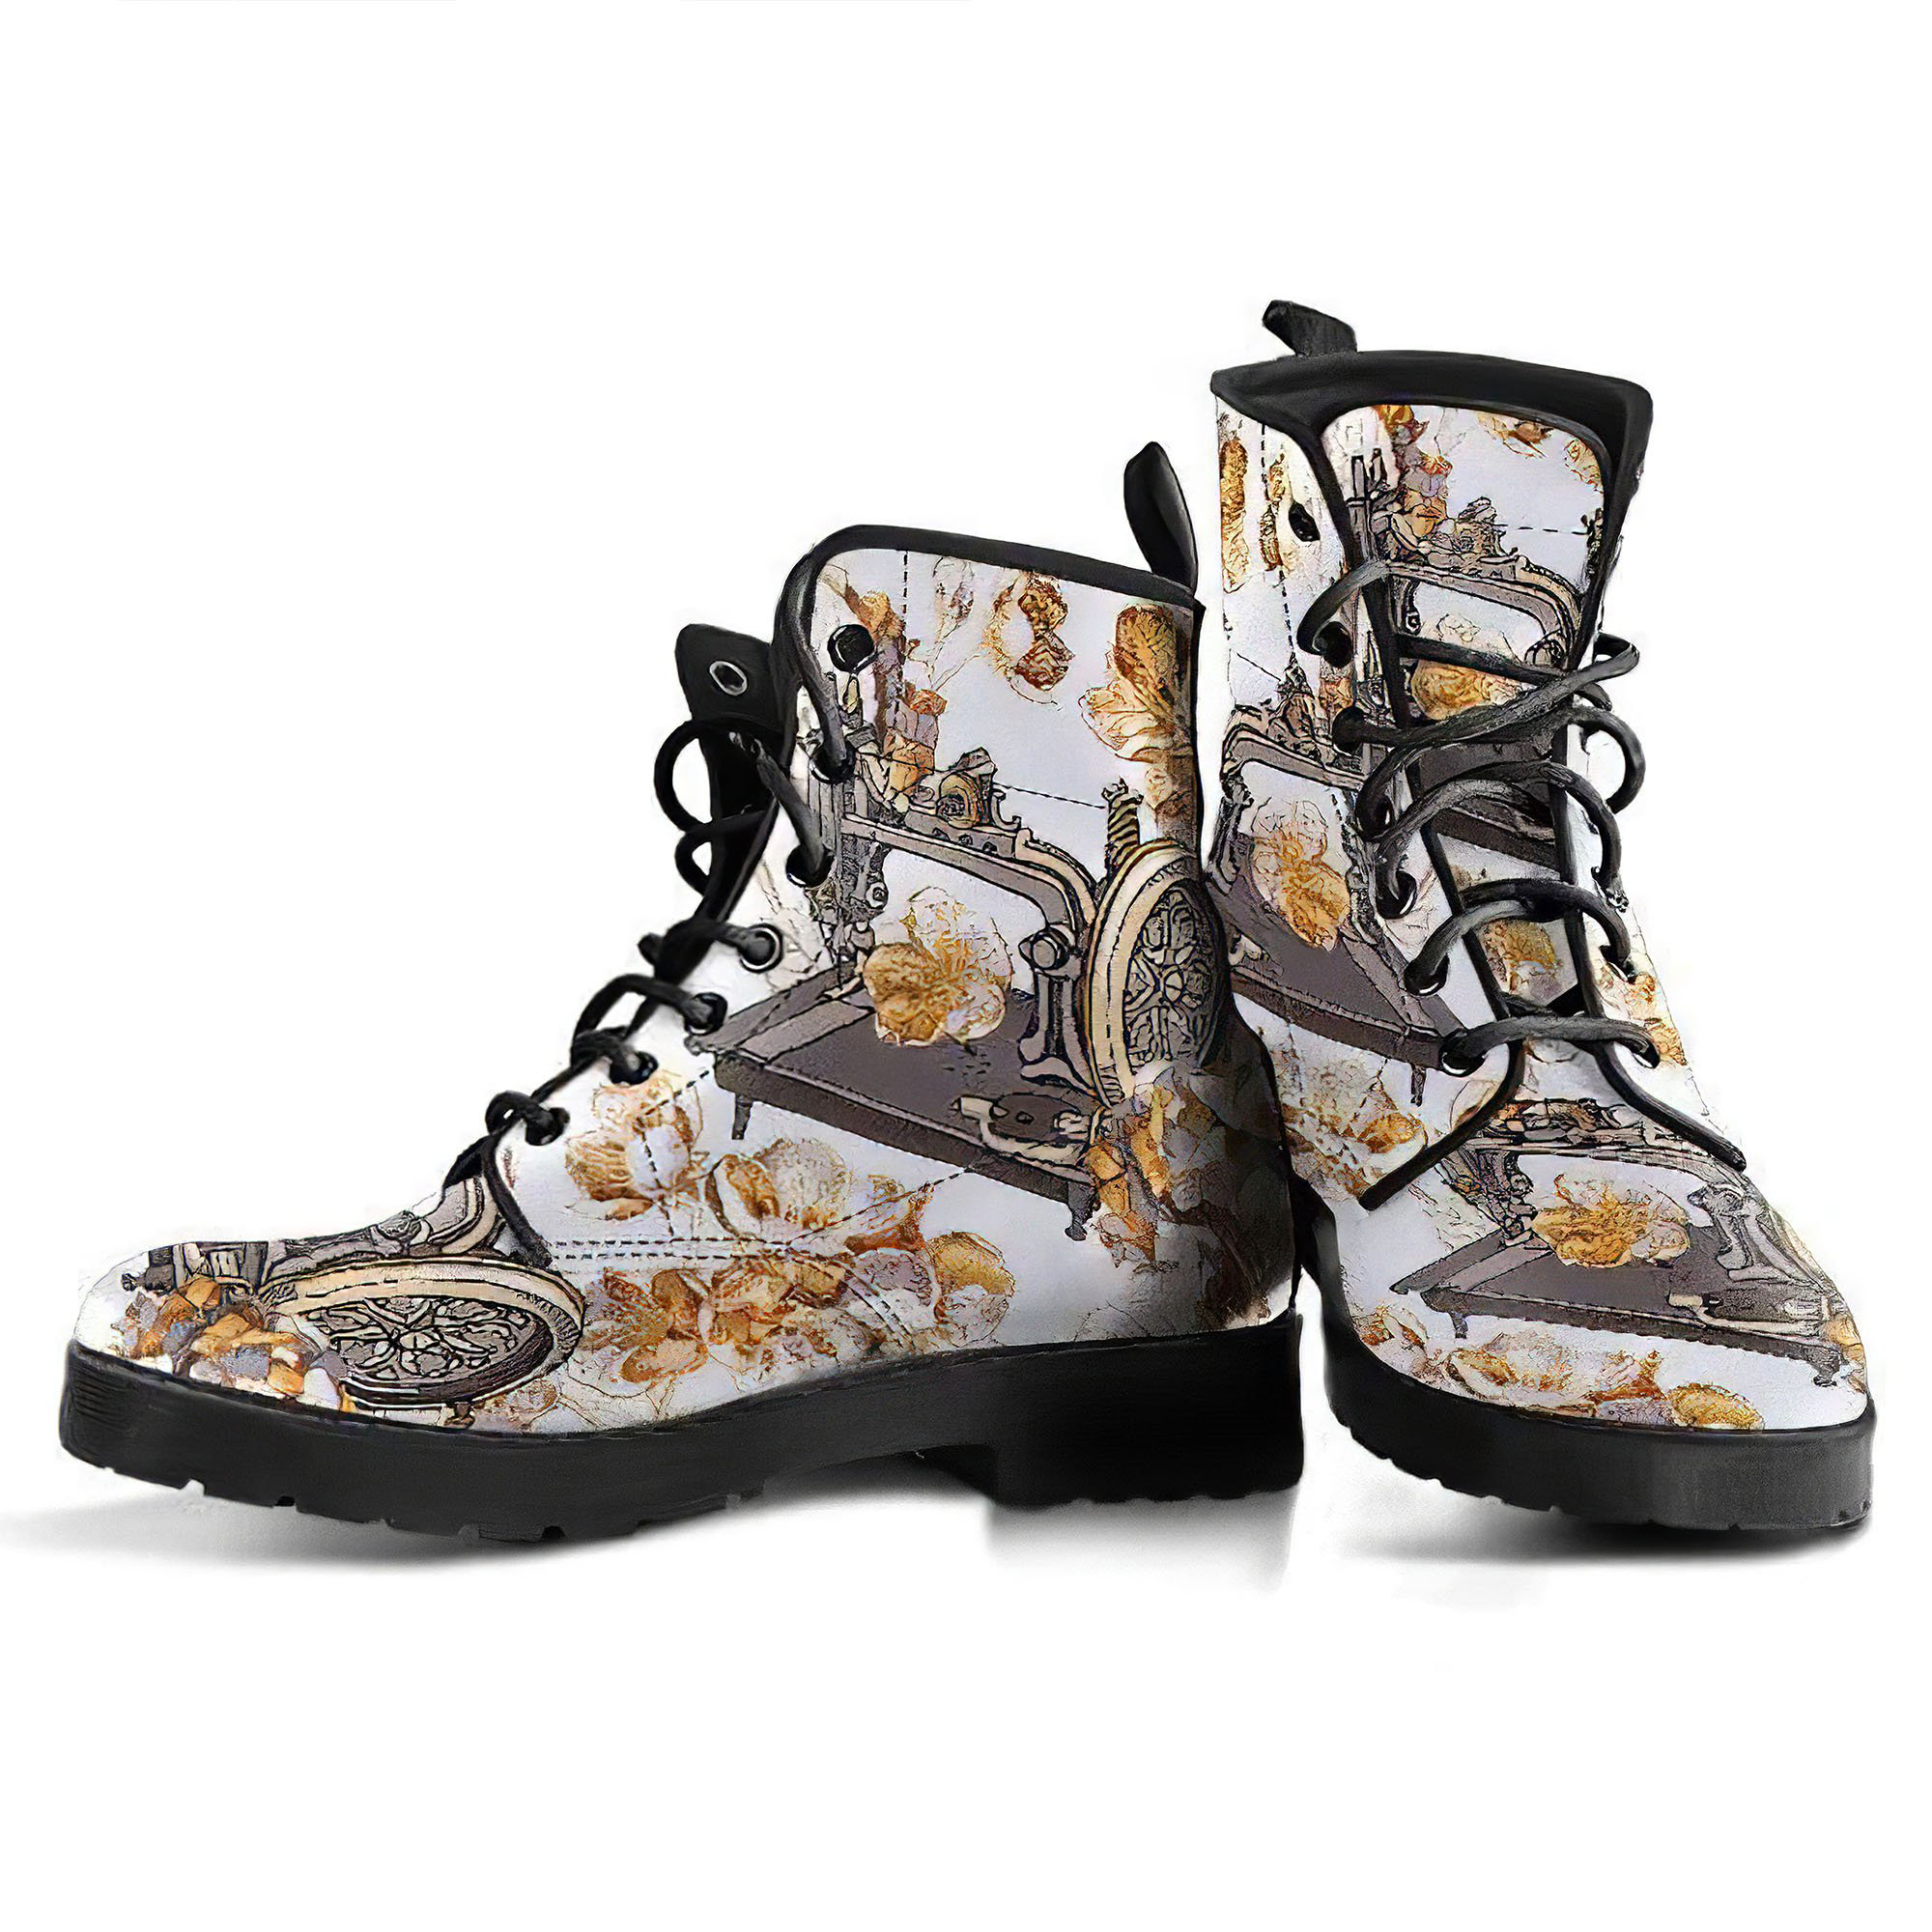 floral-sewing-machine-handcrafted-boots-gp-main.jpg